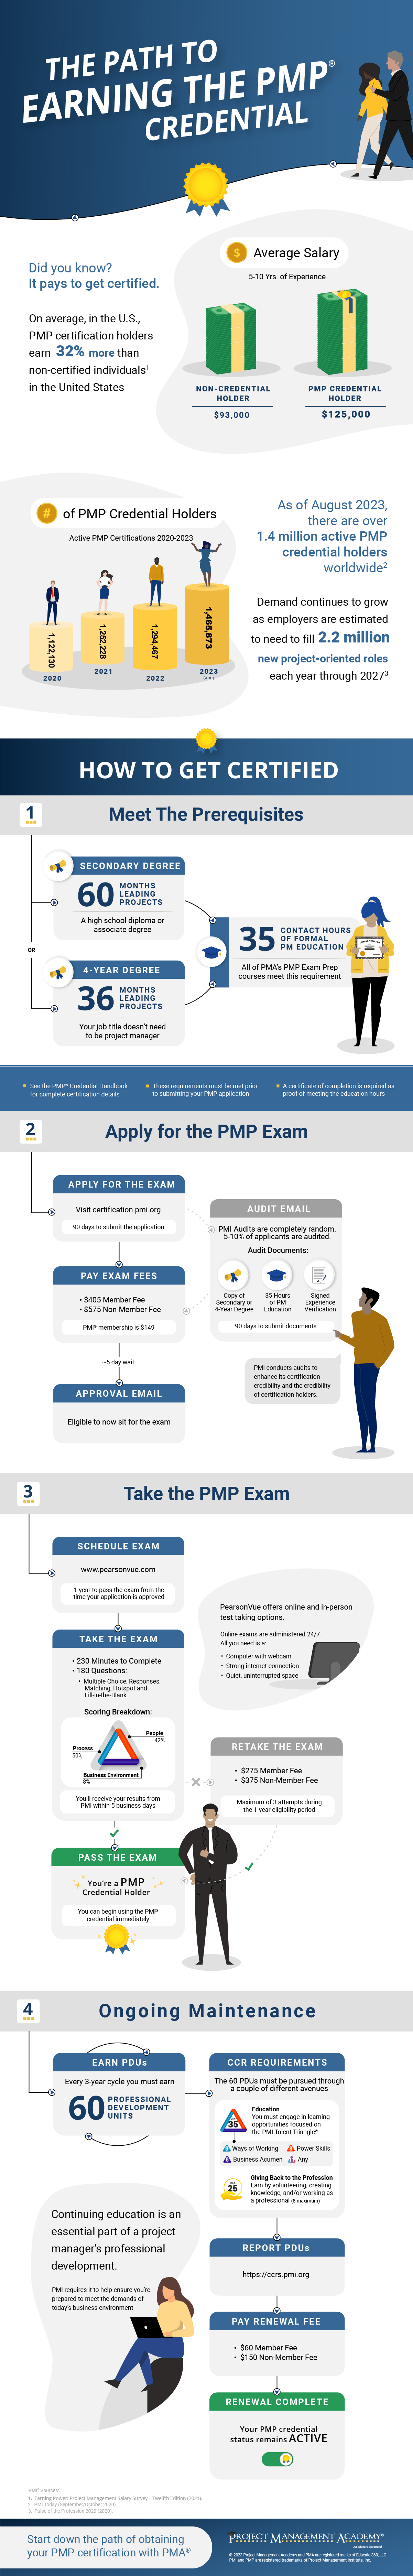 The Path to Earning the PMP Credential